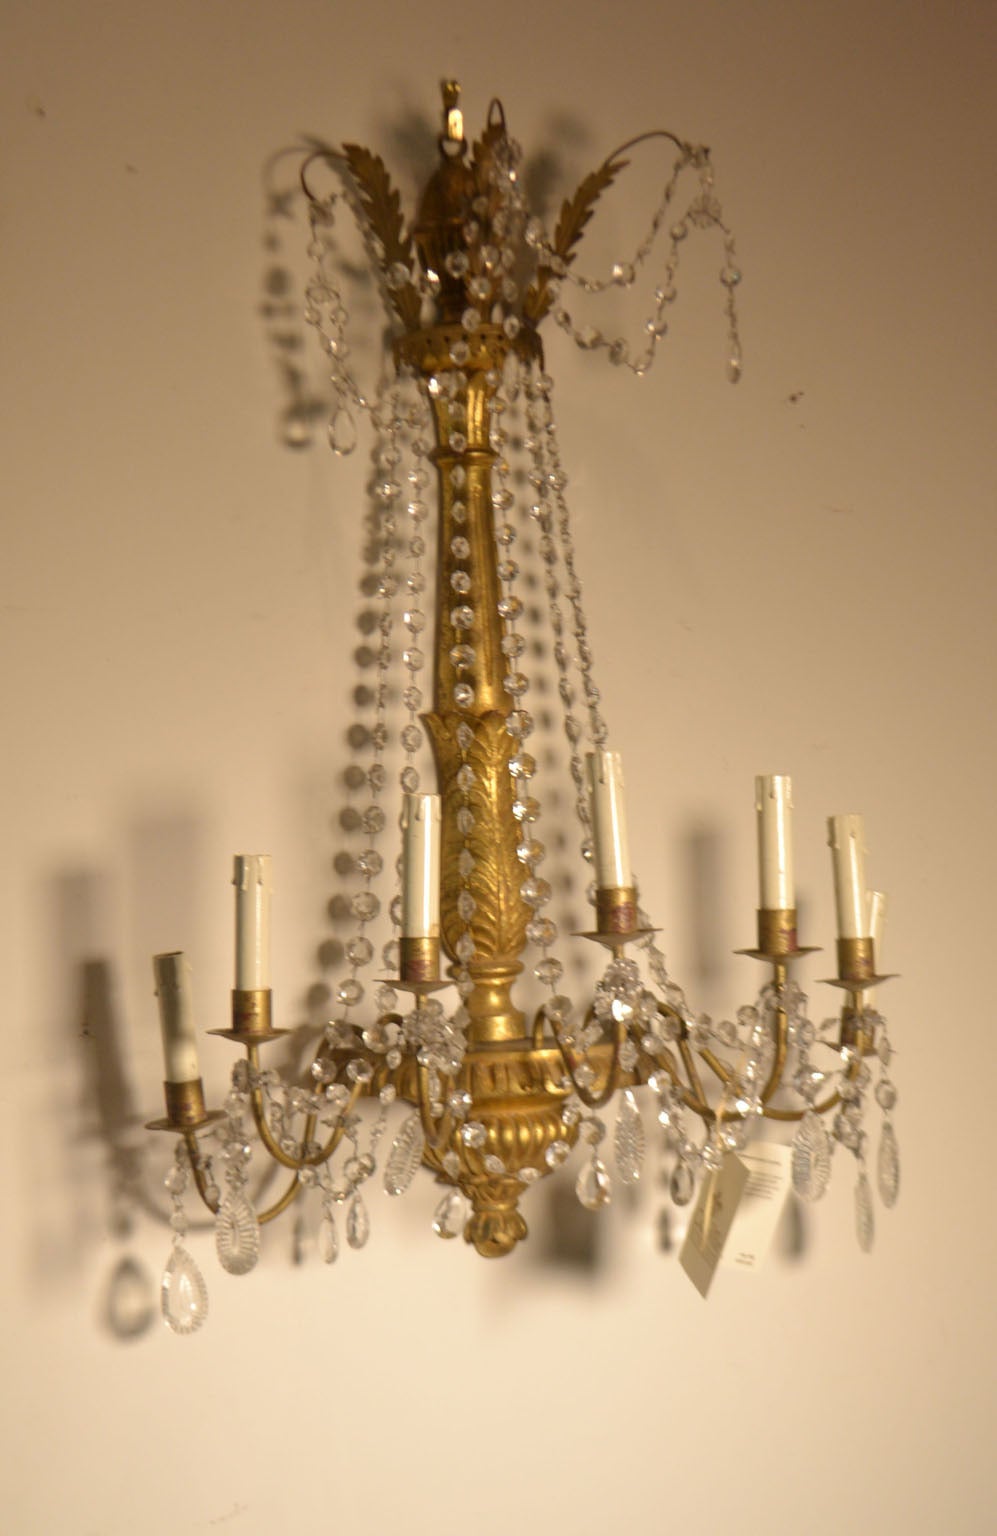 Pair of Italian 20th century (circa 1940) giltwood and crystal sconces with acanthus leaves, gadrooned urn and stylized planette with fluted stem, crystal drops and seven lights with faux candles.